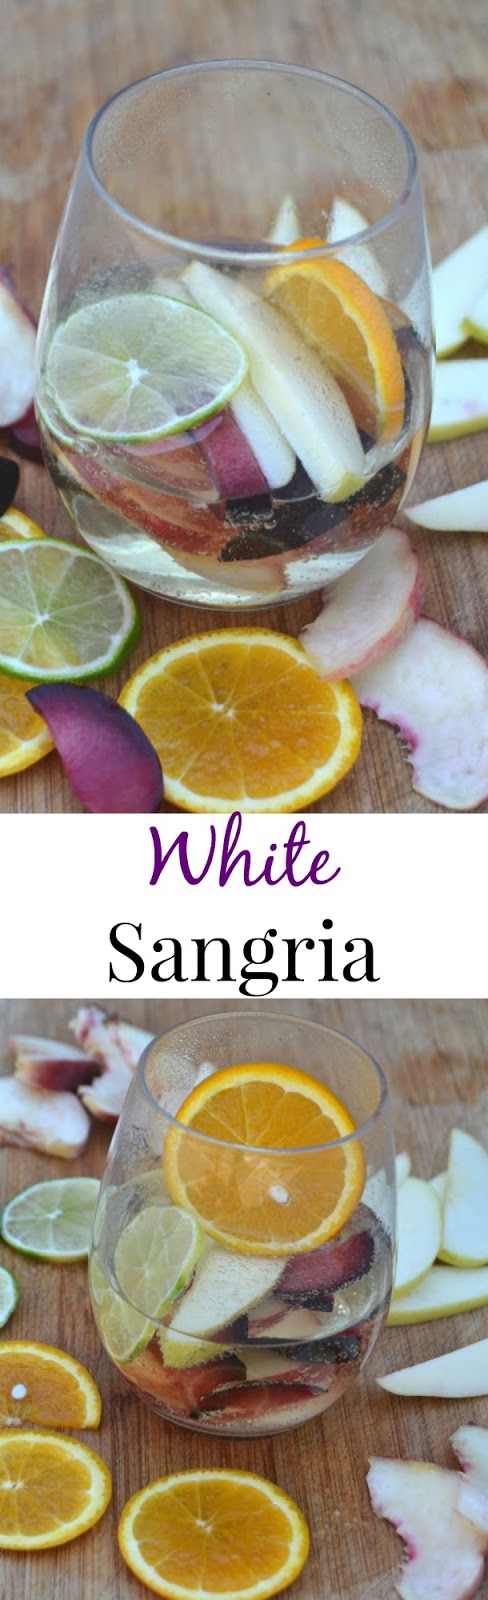 Customize this Simple White Sangria with your favorite fruits for a delicious beverage on a hot day! www.nutritionistreviews.com